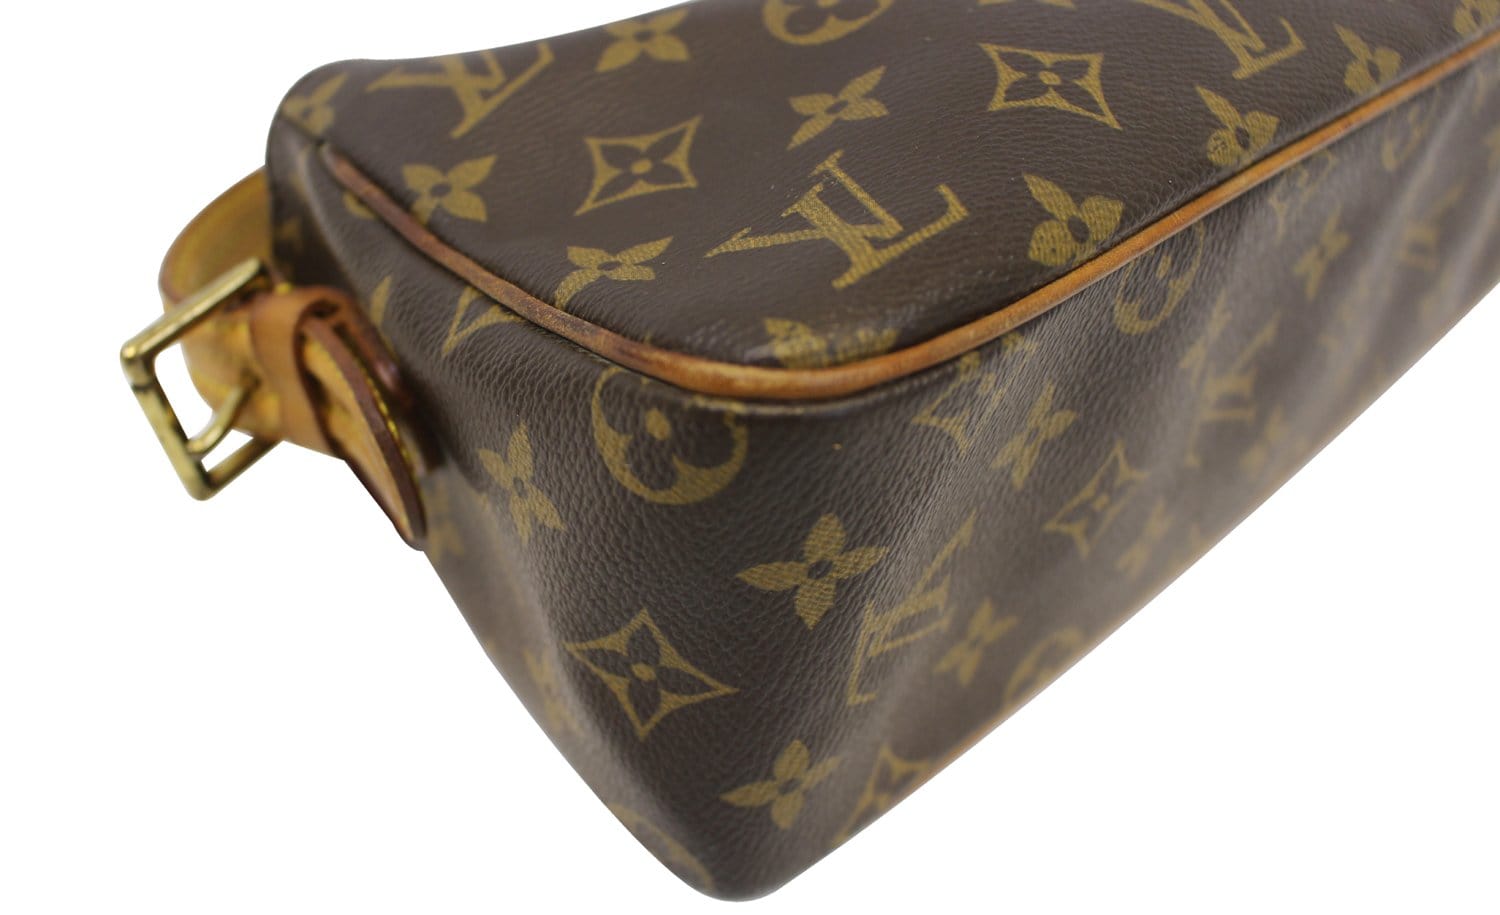 Resale Ladies Consignment Events - Louis Vuitton limited edition